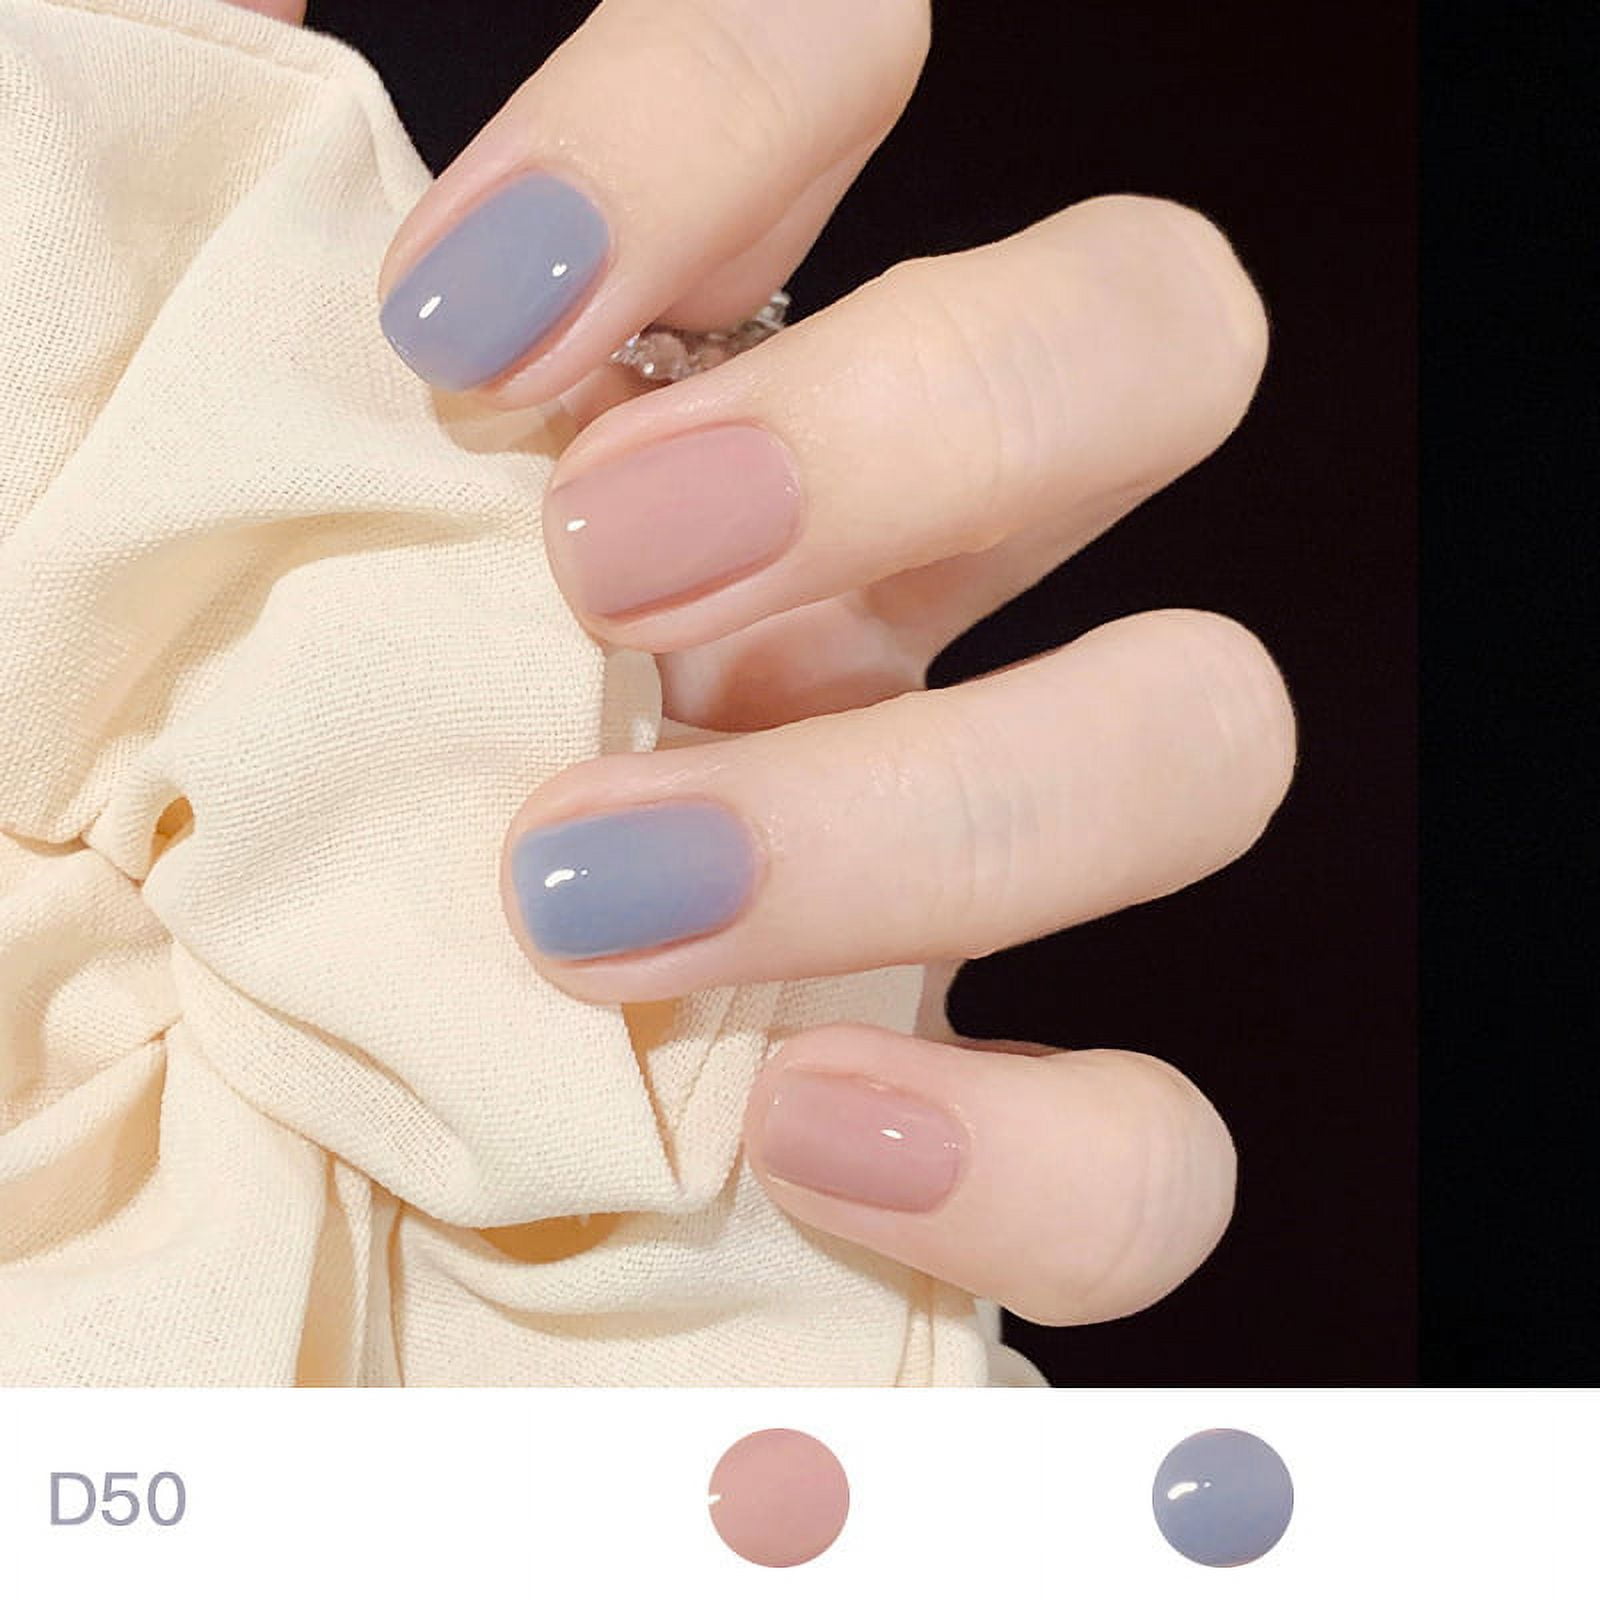 Trend spotting: Marble nail art with a step-by-step guide